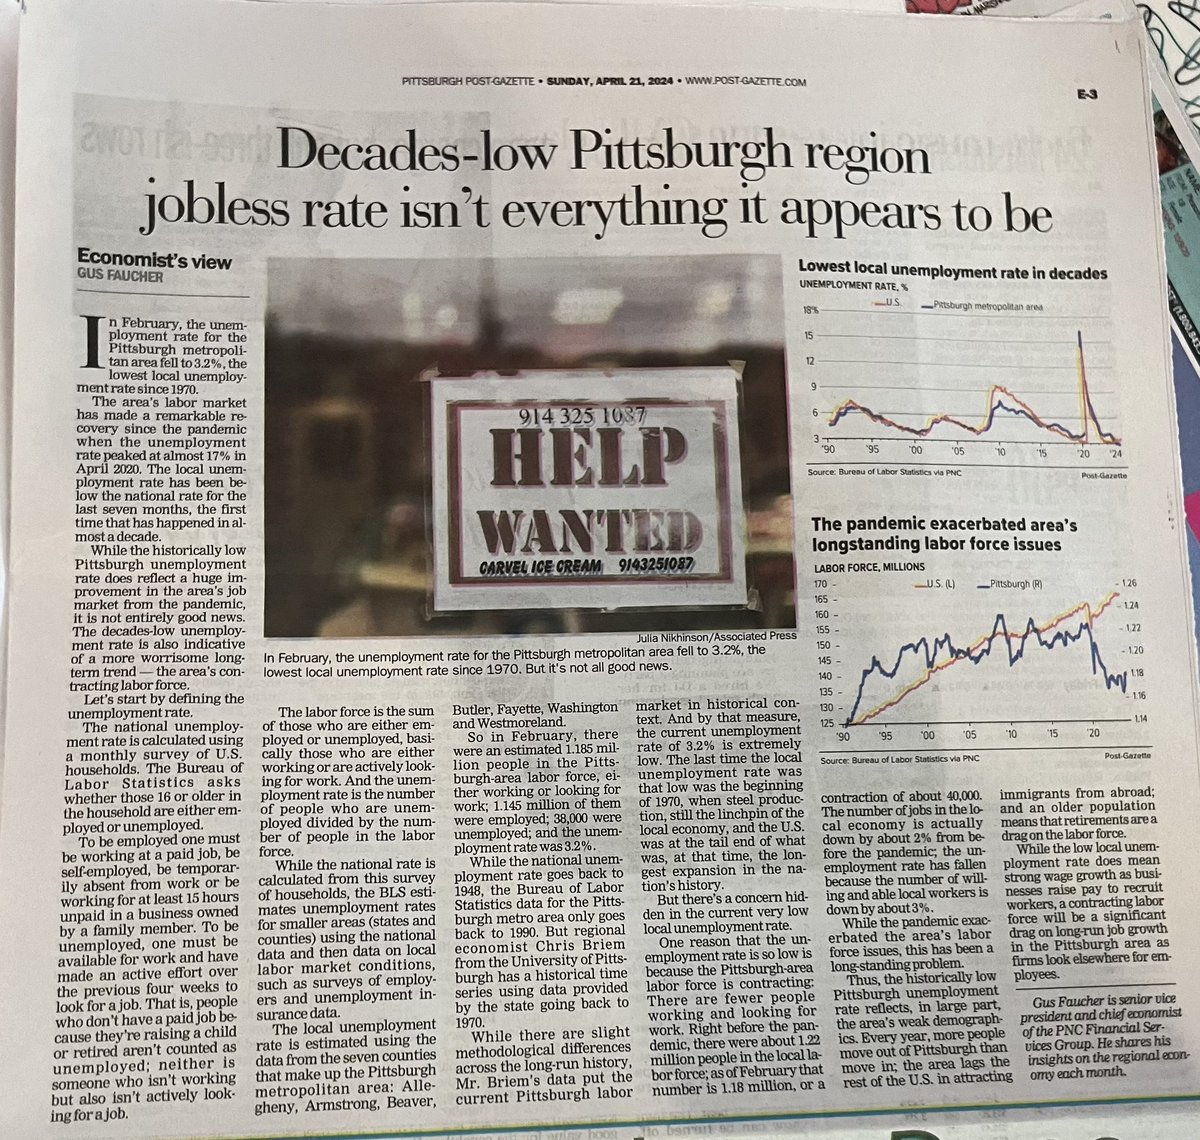 “While low #Pittsburgh unemployment rate does mean strong wage growth … contracting labor force will be a significant drag on long-run #jobgrowth in the #SteelCity as firms look elsewhere for employees.” - @GusFaucherPNC 

A frightening #RustBelt future.

post-gazette.com/business/caree…